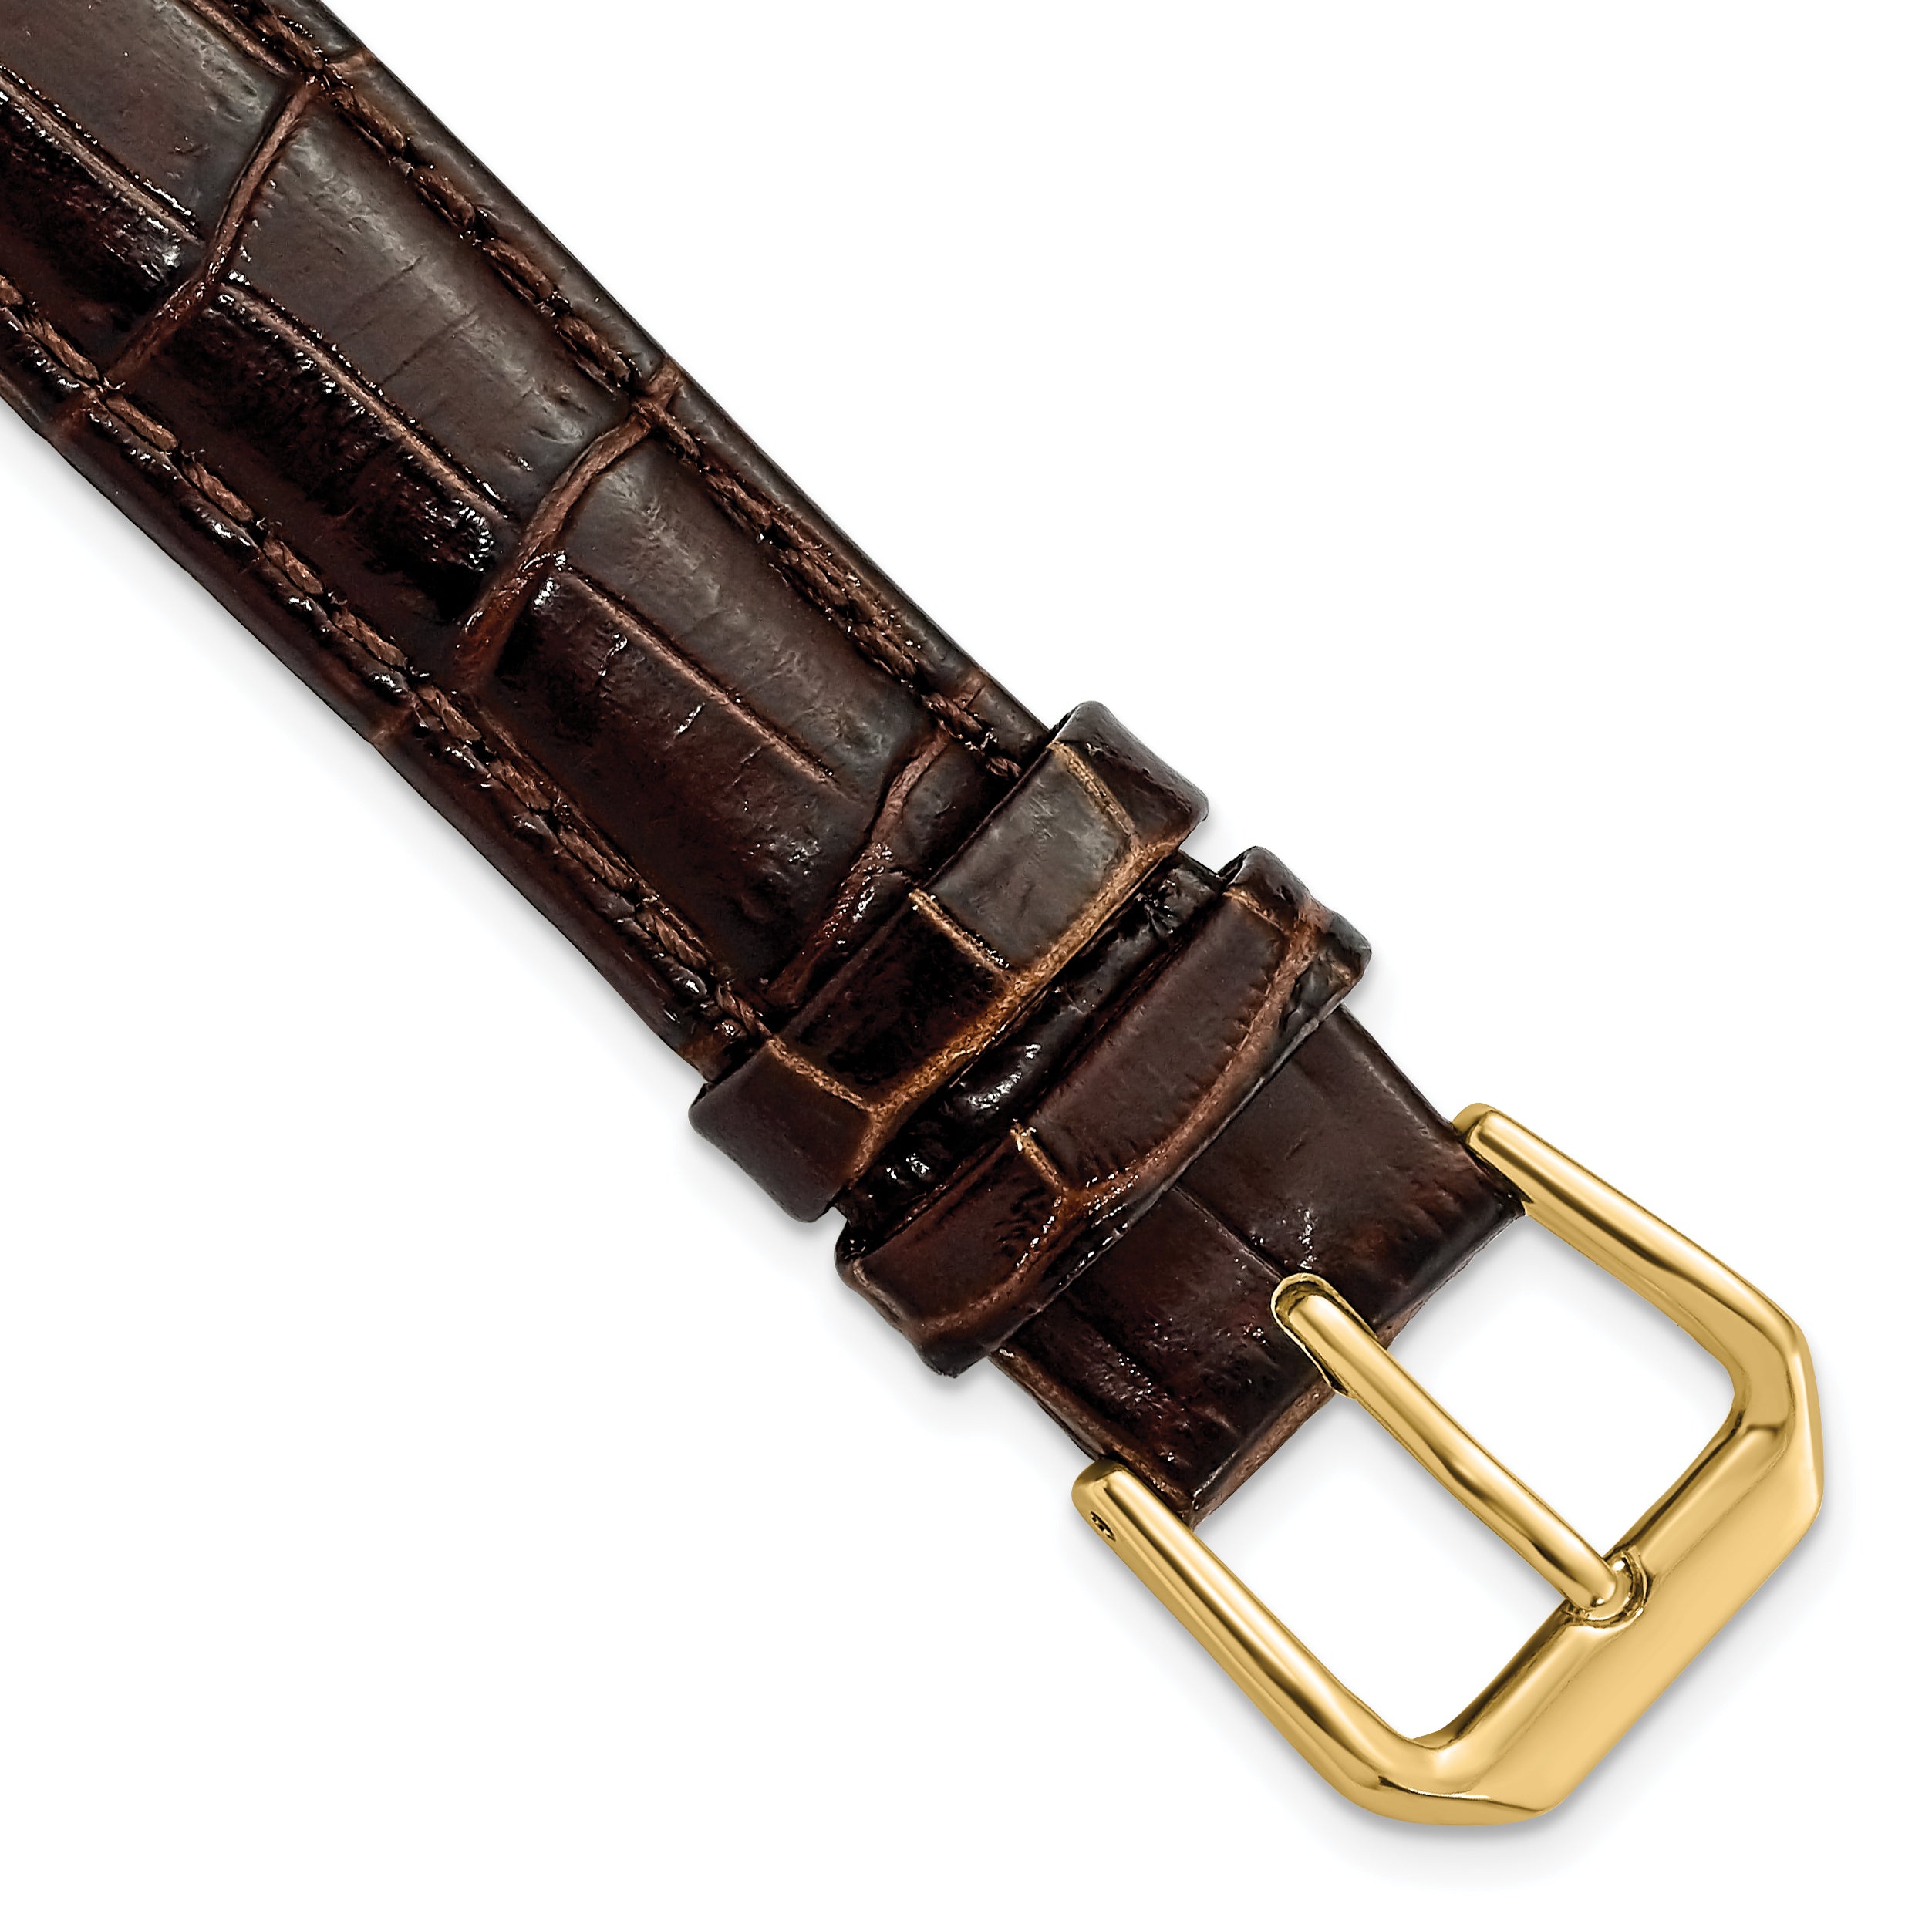 DeBeer 16mm Brown Crocodile Grain Leather with Dark Stitching and Gold-tone Buckle 7.5 inch Watch Band